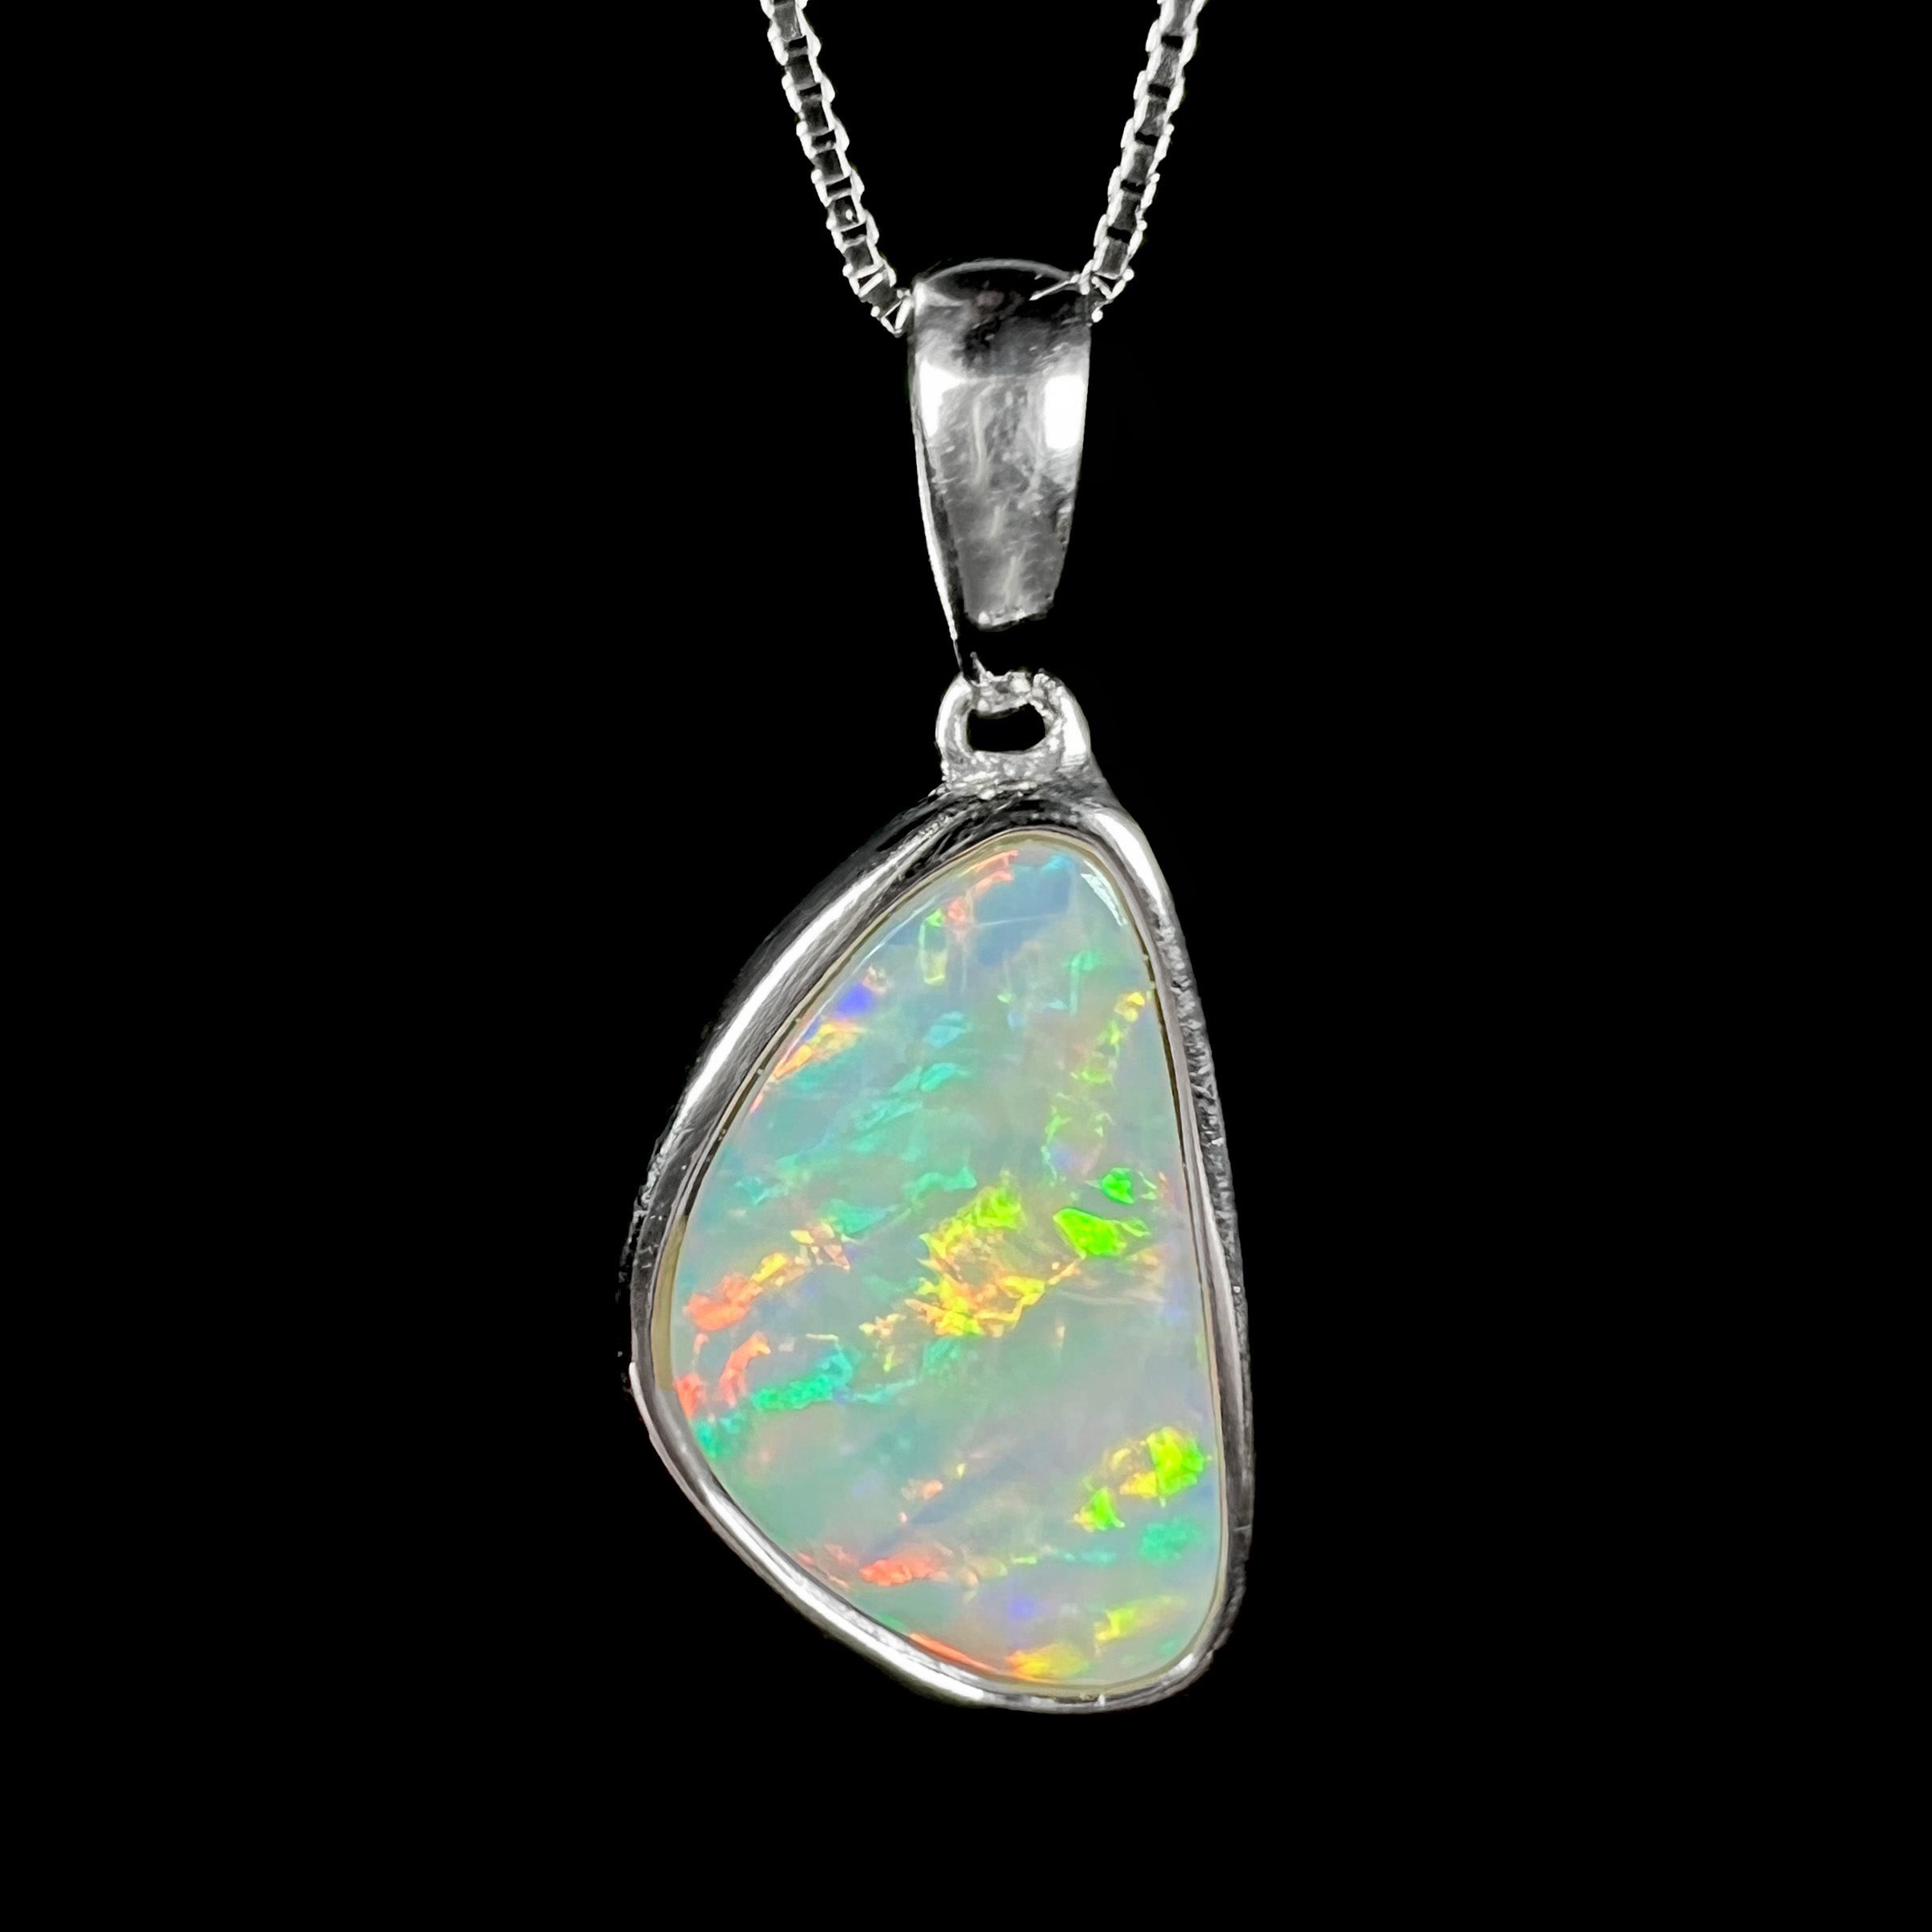 925 Sterling Silver Raw Opal Pendant Necklace, Real Ethiopian Opal Rough,  100% Natural Crystals, Fire Play Gemstone Gift Jewelry 18 Inch - Etsy | Opal  pendant necklace, Gemstone gifts, Opal pendants